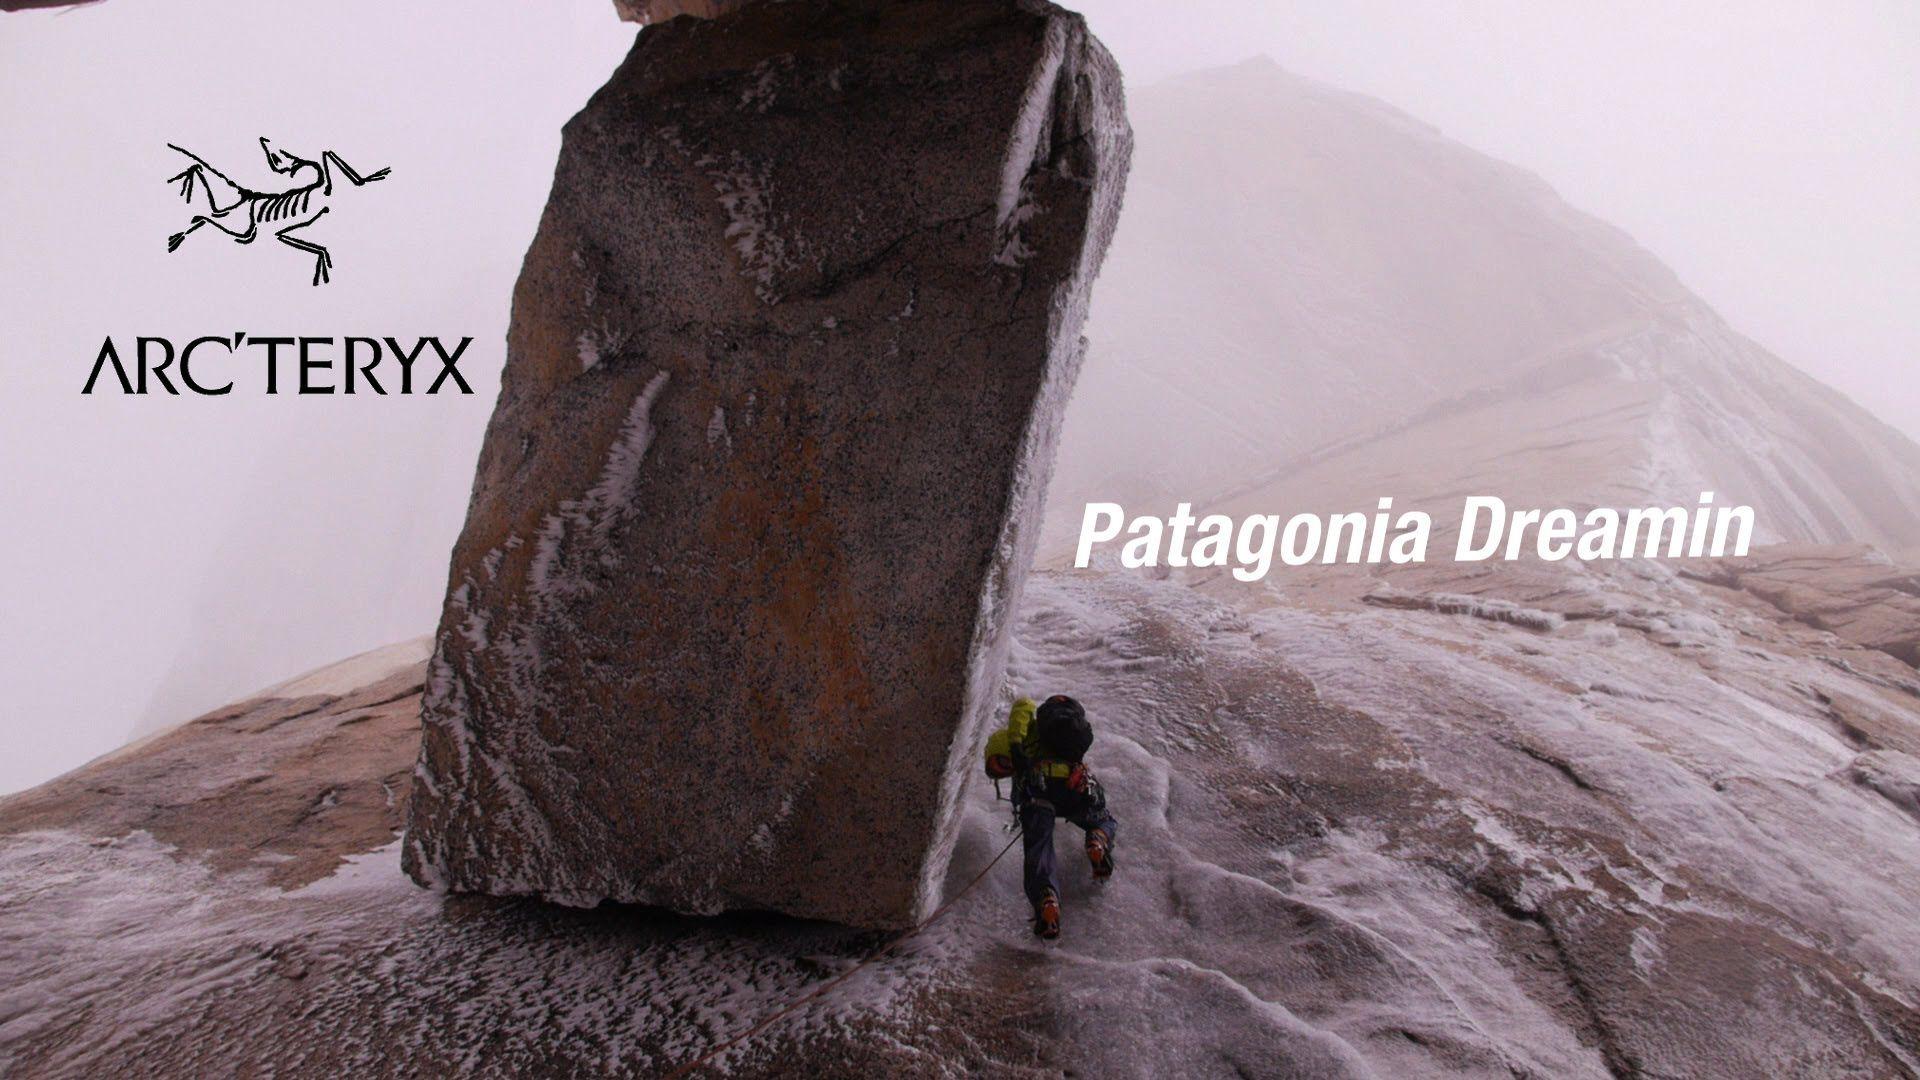 Patagonia Dreamin' video from Arc'teryx and Alias Cinema